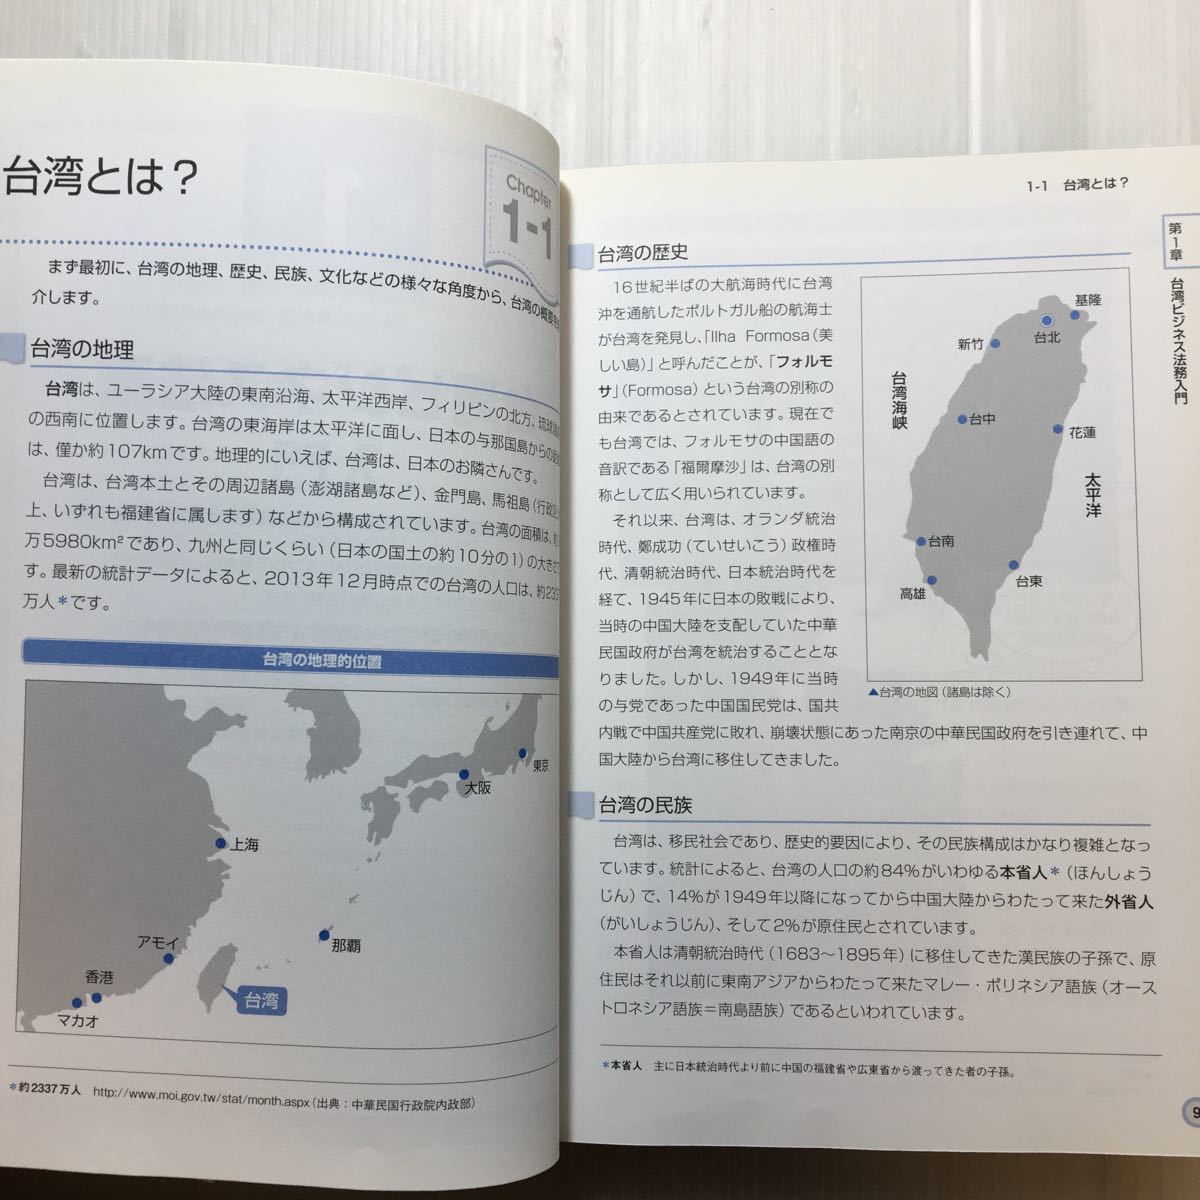 zaa-175♪図解入門ビジネス台湾ビジネス法務の基本がよ~くわかる本 (How‐nual Business Guide Book) 2014/3/7 遠藤 誠 (著), 紀 鈞涵 (著)_画像4